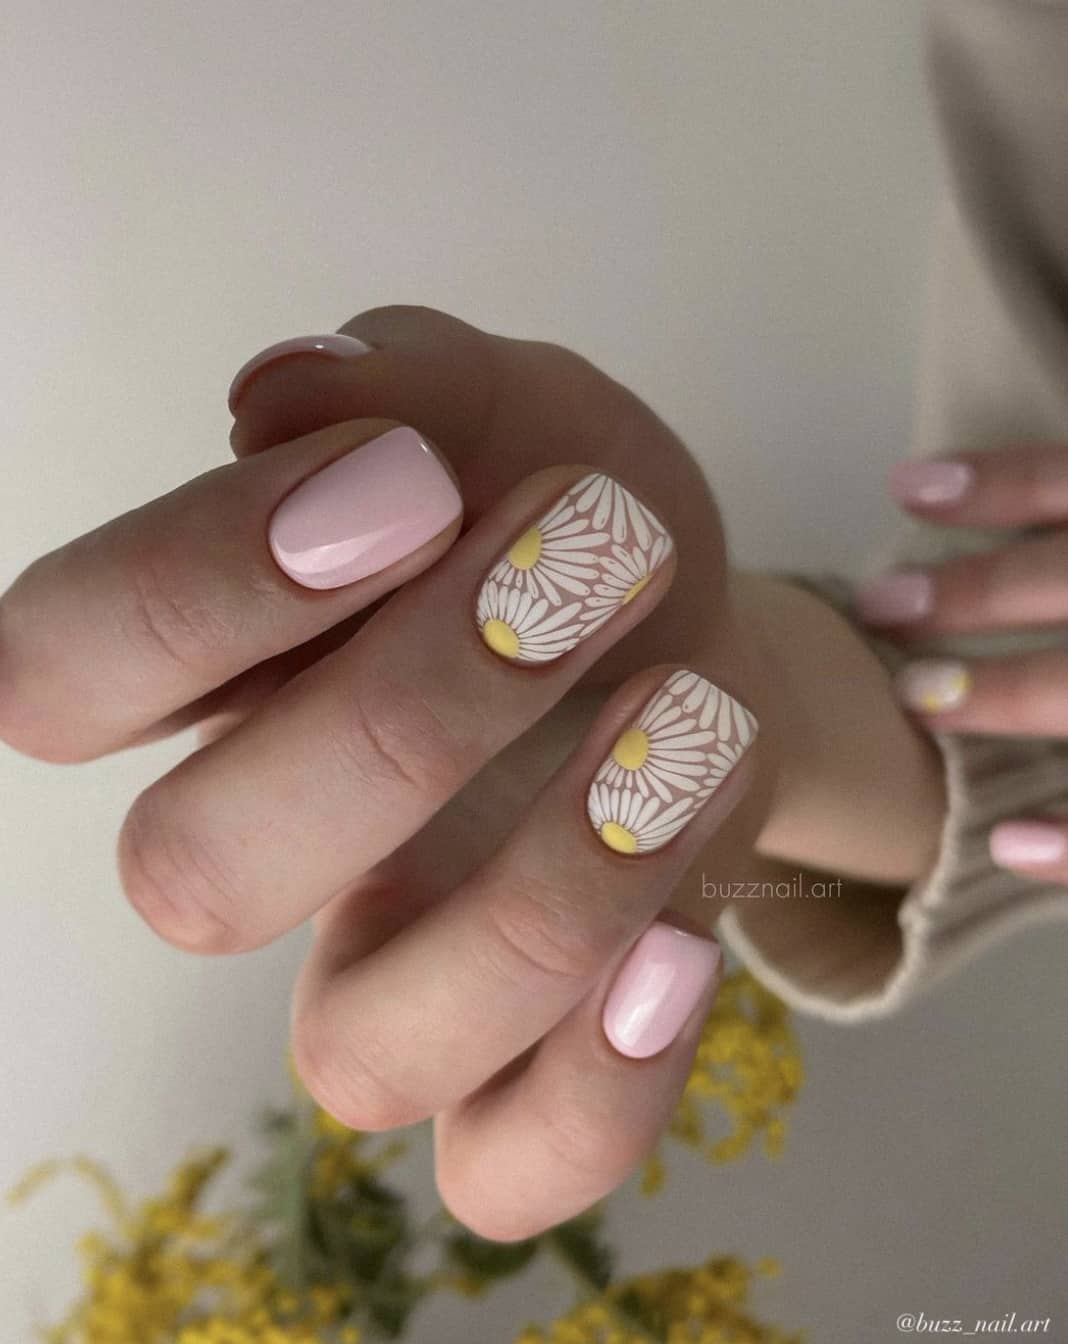 A hand with short square nails painted a light pink and accent nails with white daisy nail art